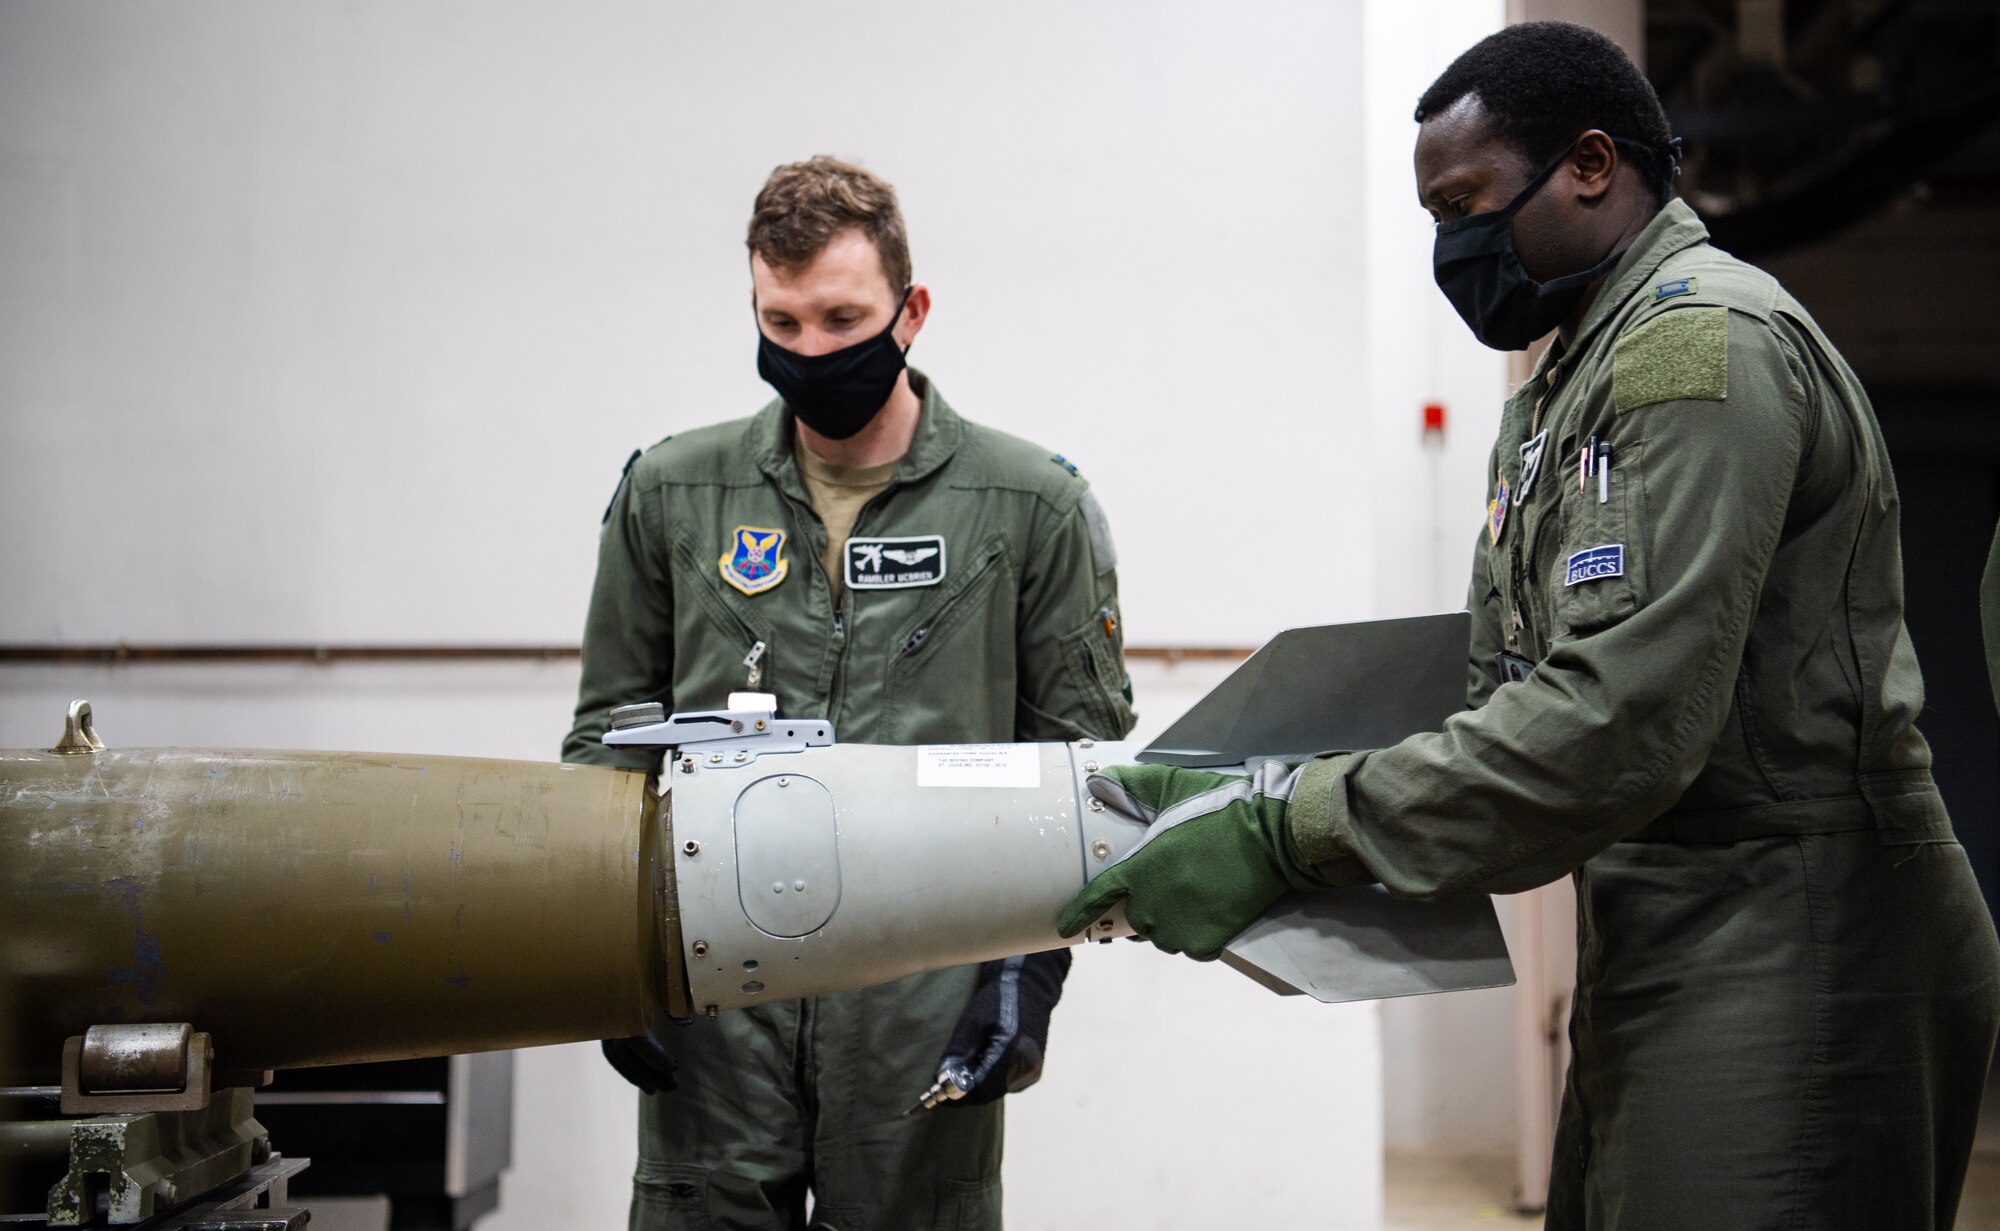 Capts. Michael McBrien and Joseph Okai, 340th Weapons Squadron weapon instructors course students, assemble a training munition during a training bomb build at Barksdale Air Force Base, Lousiana, April 13, 2021. Airmen from the 340th WPS integrated with the 2nd Munitions Squadron to teach the students the components and procedures that go into assembling a bomb. (U.S. Air Force photo by Airman 1st Class Jacob B. Wrightsman)